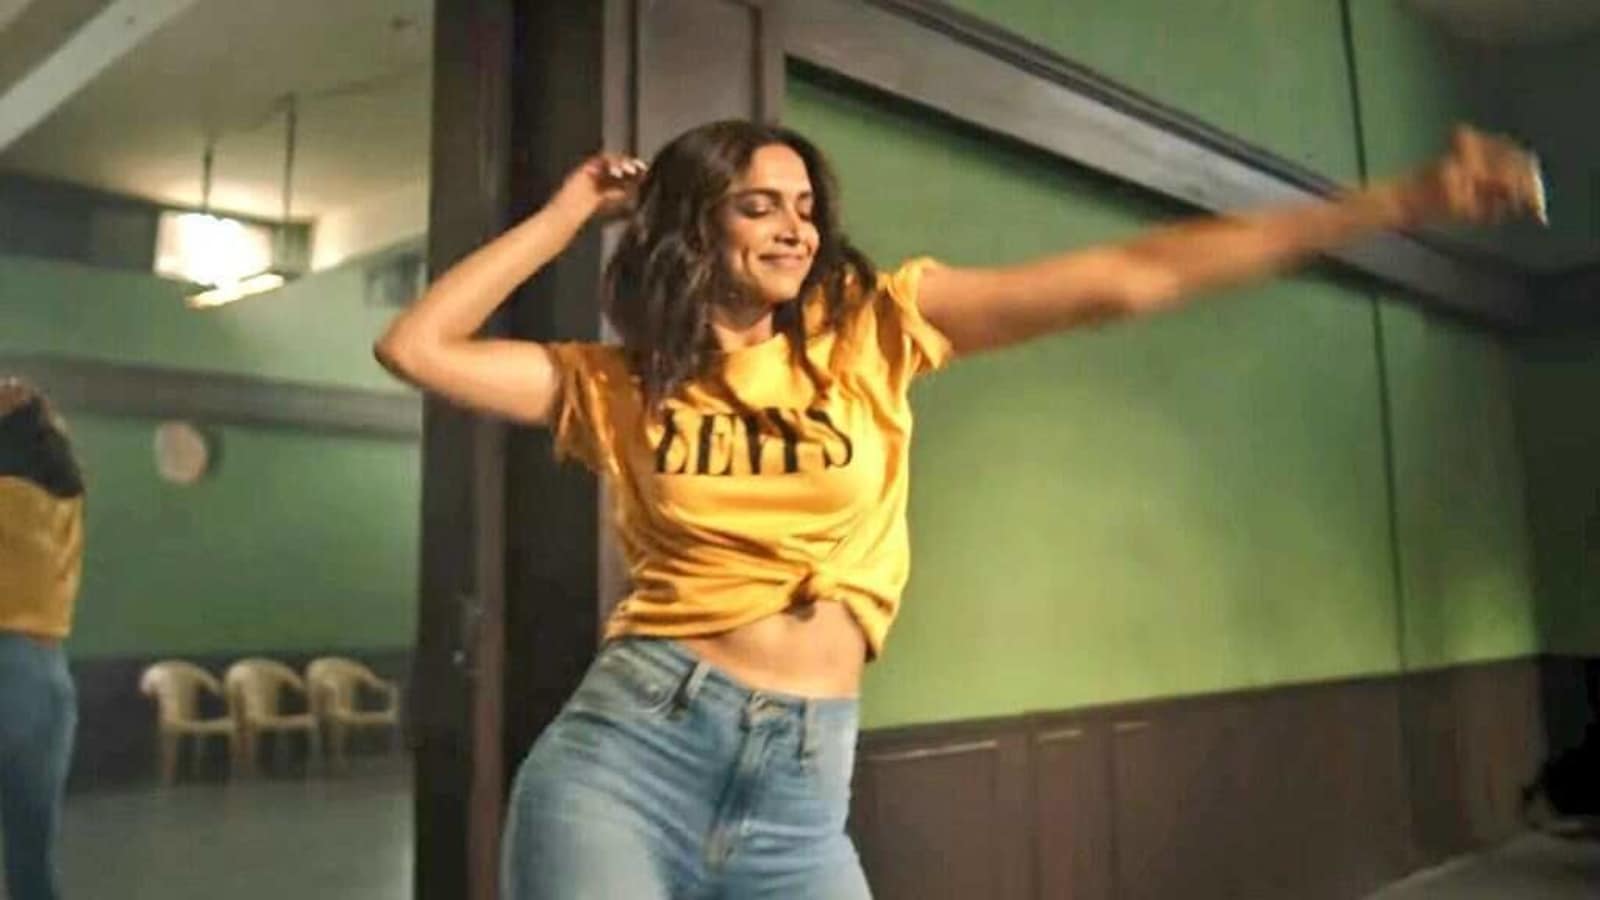 For Levis Ad, It Doesn't Get Any More Casual Classic Than Deepika  Padukone's Denim-On-Denim Shirt And Jeans